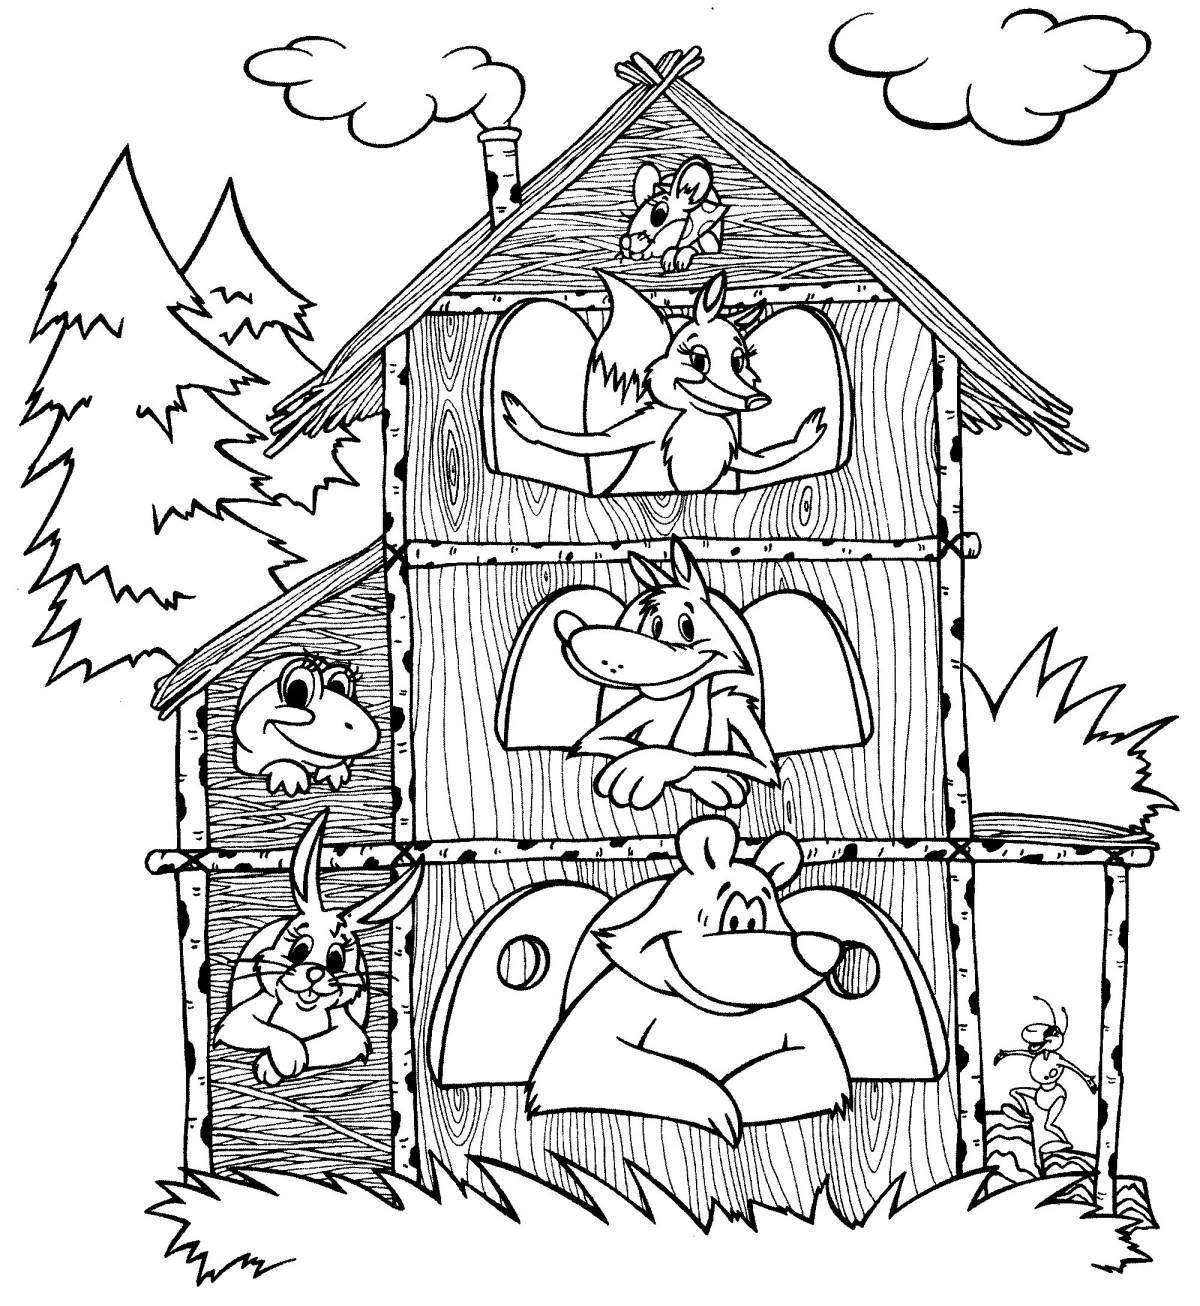 Radiant cat house coloring page for pre-k